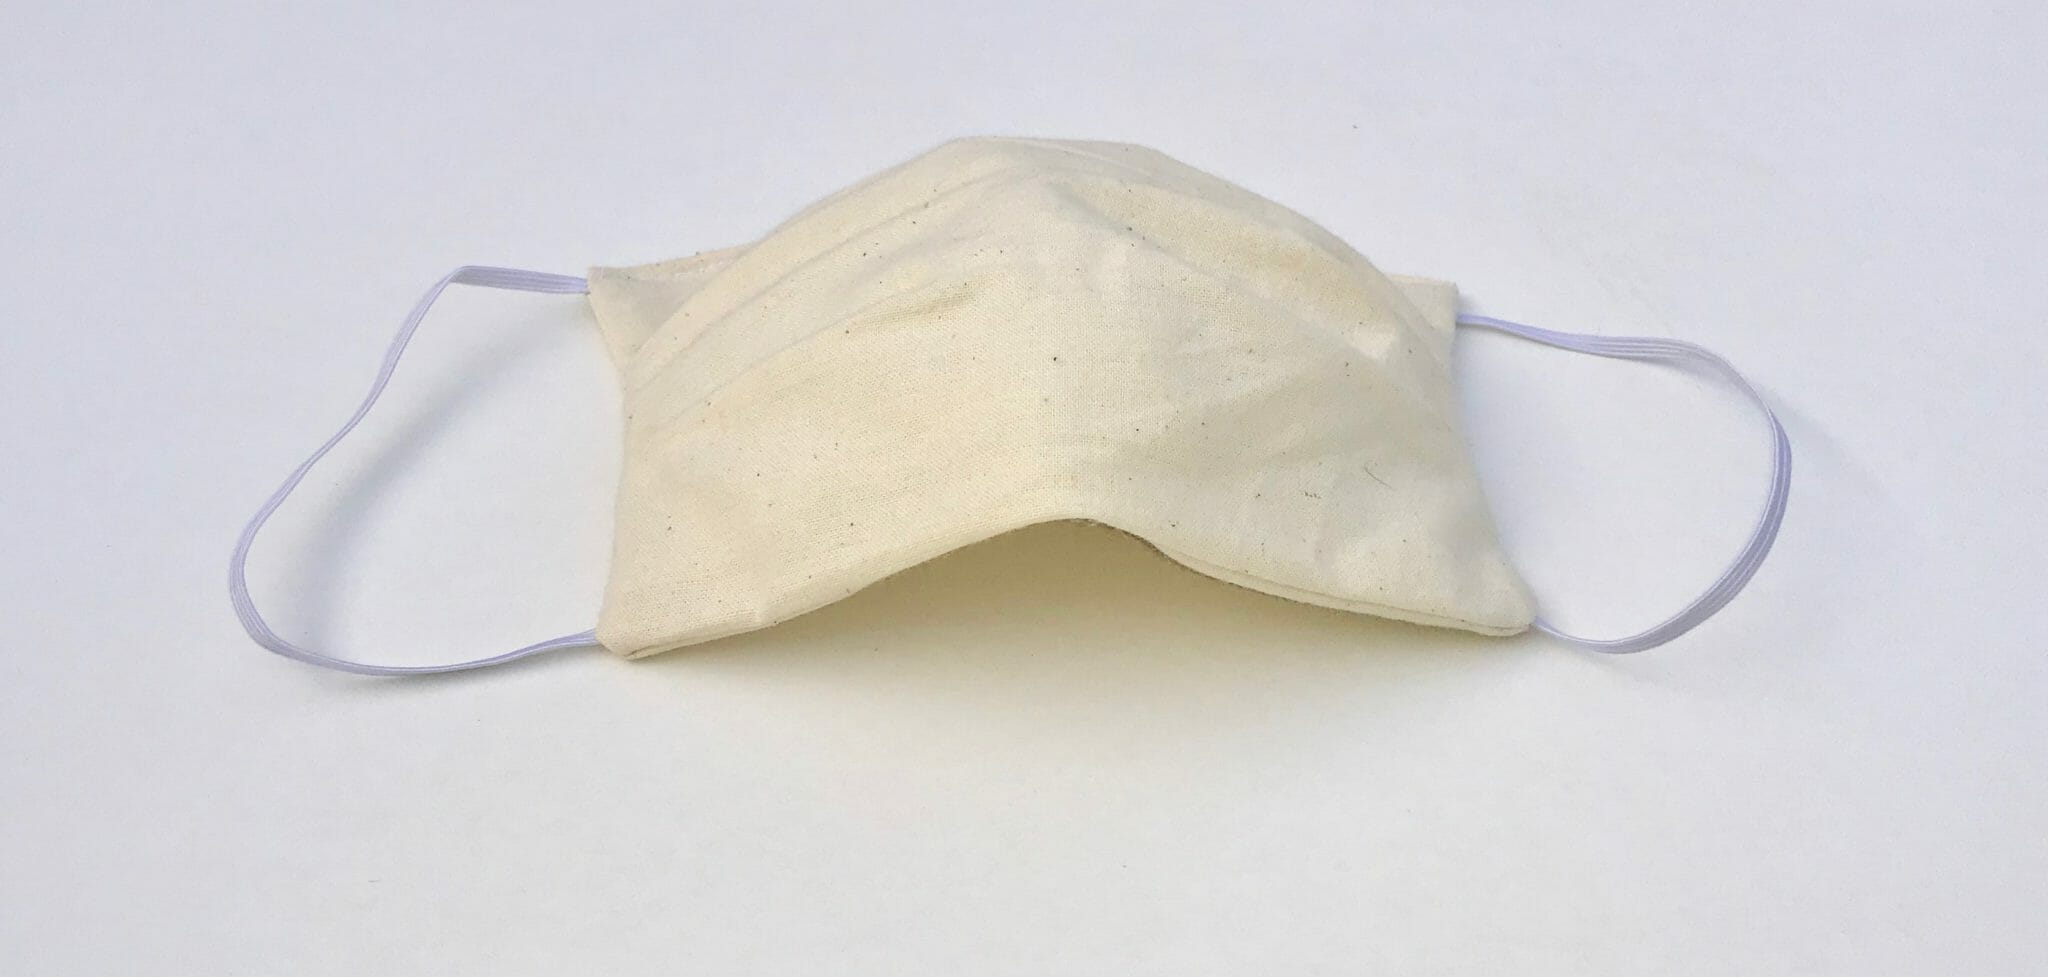 Super Simple Face Mask Pattern For Adults And Kids | So Sew Easy